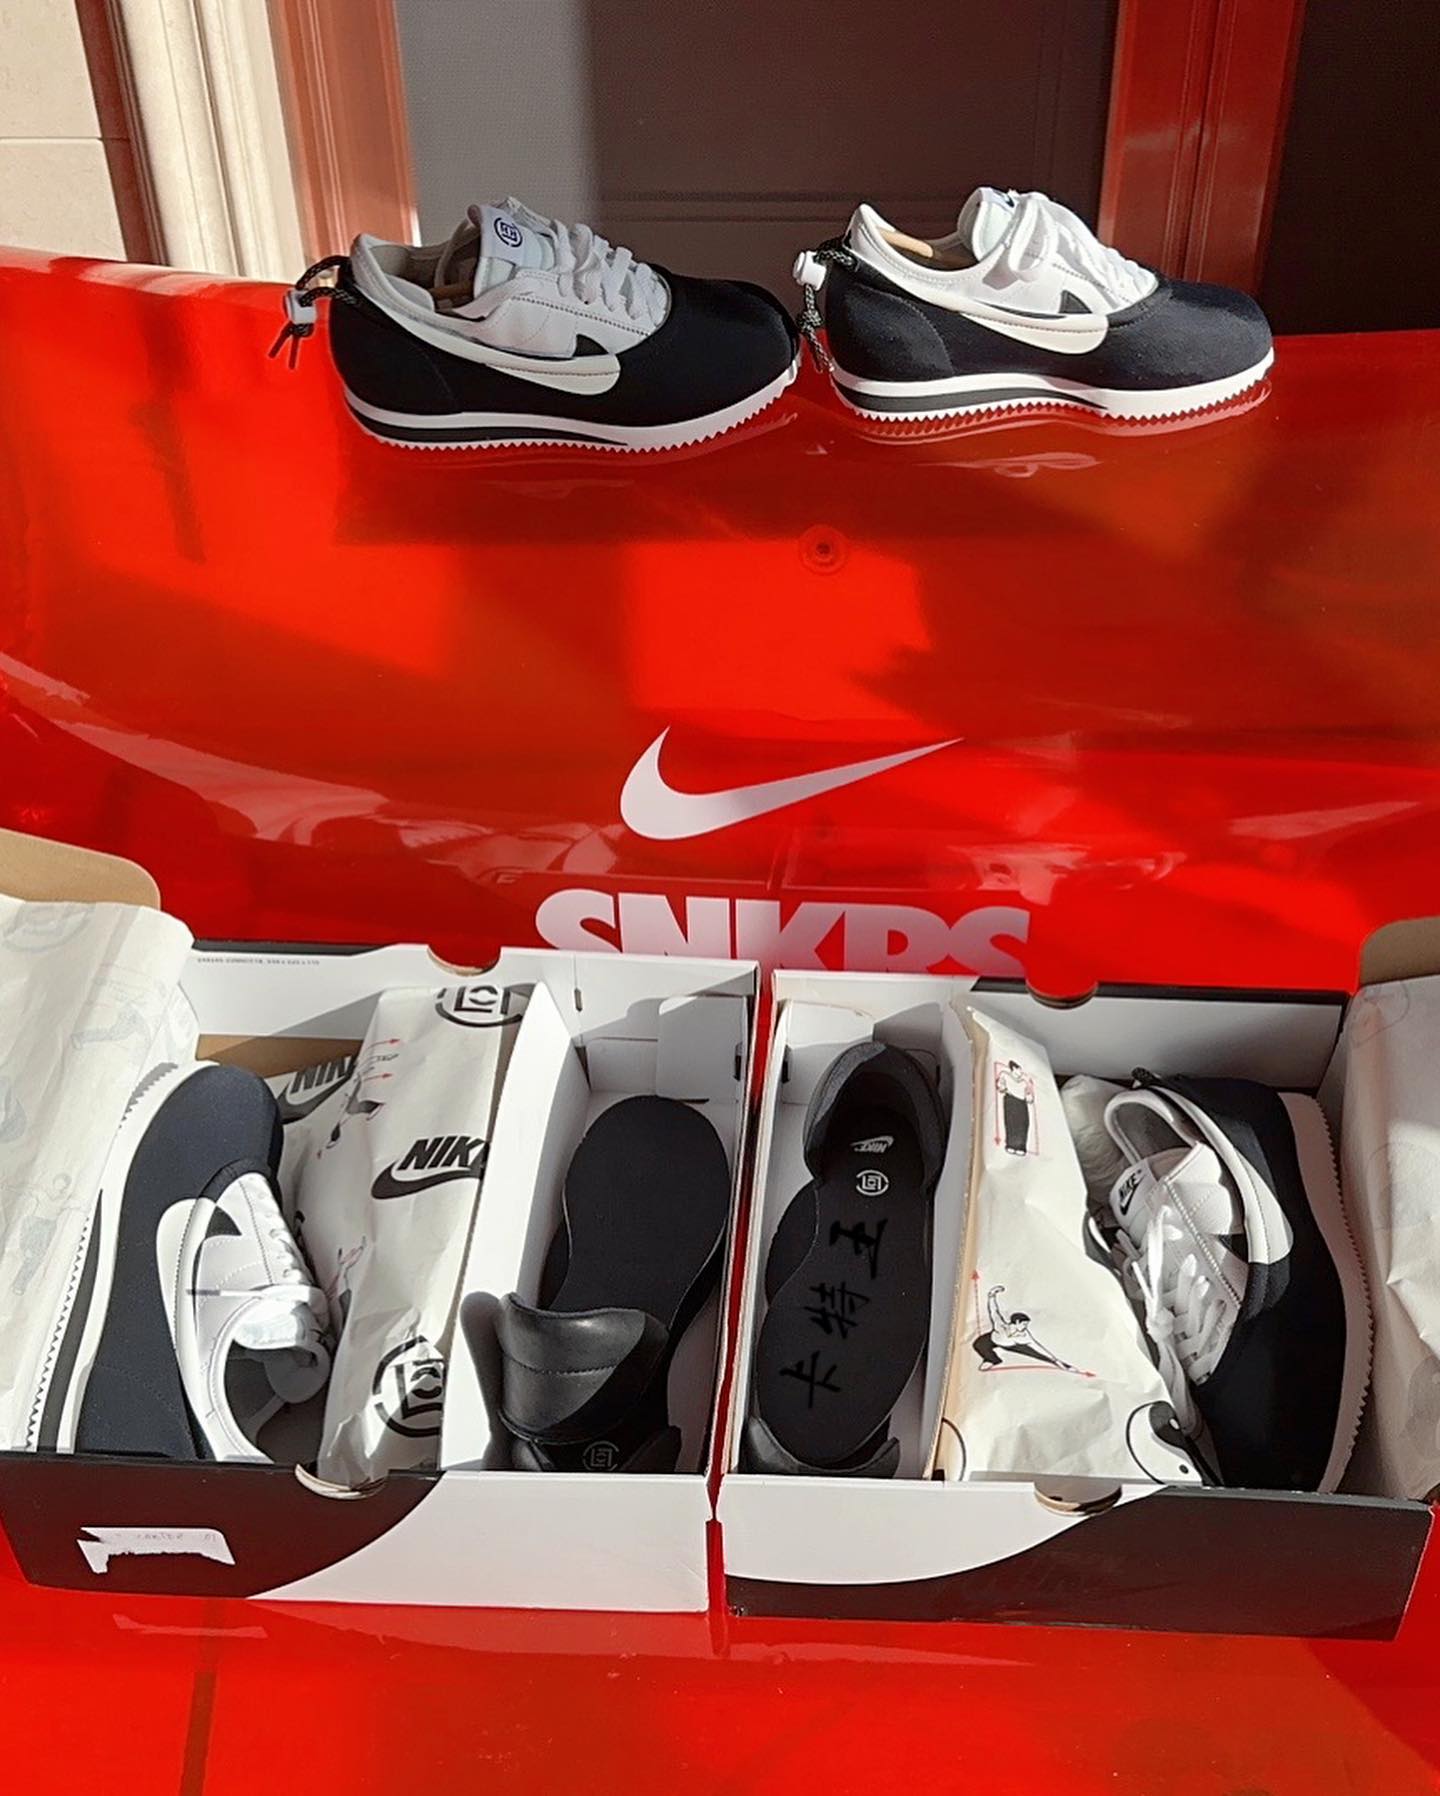 Clot x Nike Cortez Collab First Look